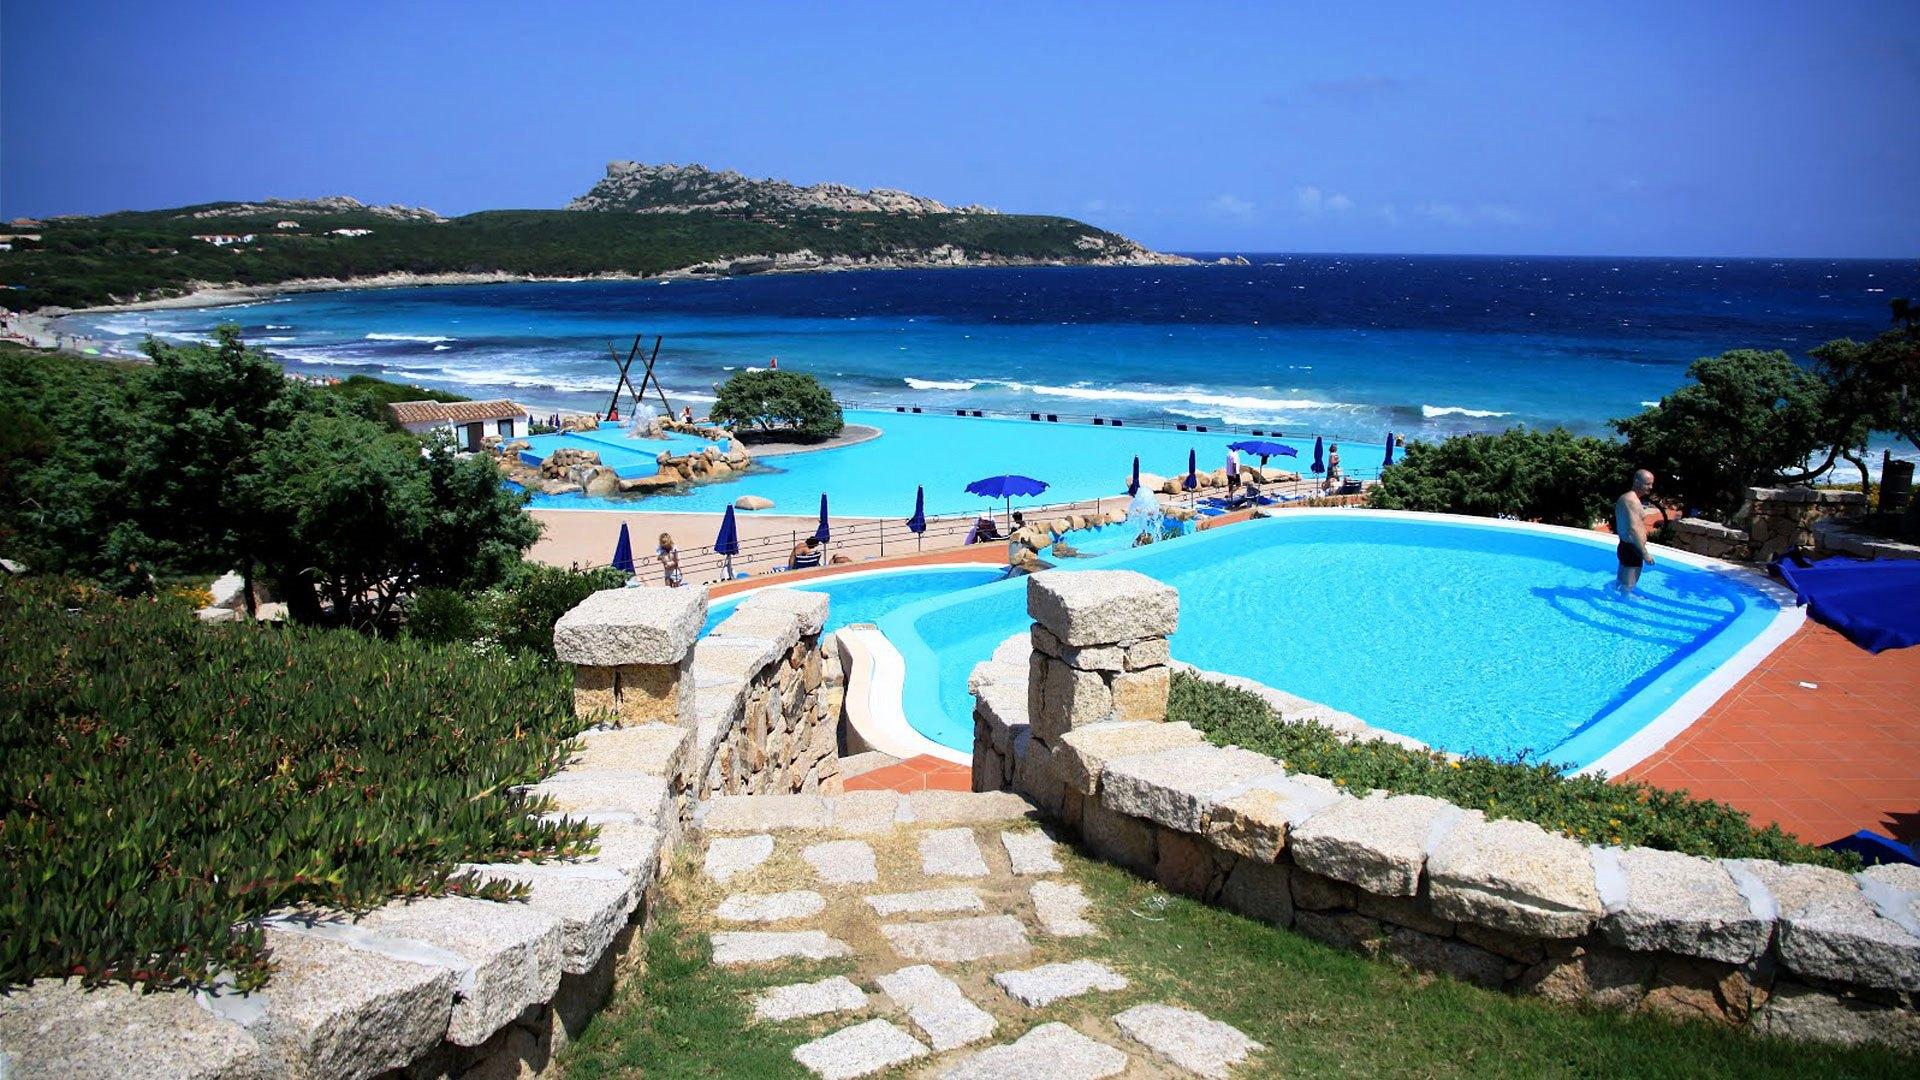 The pool at the hotel on the island of Sardinia, Italy wallpaper